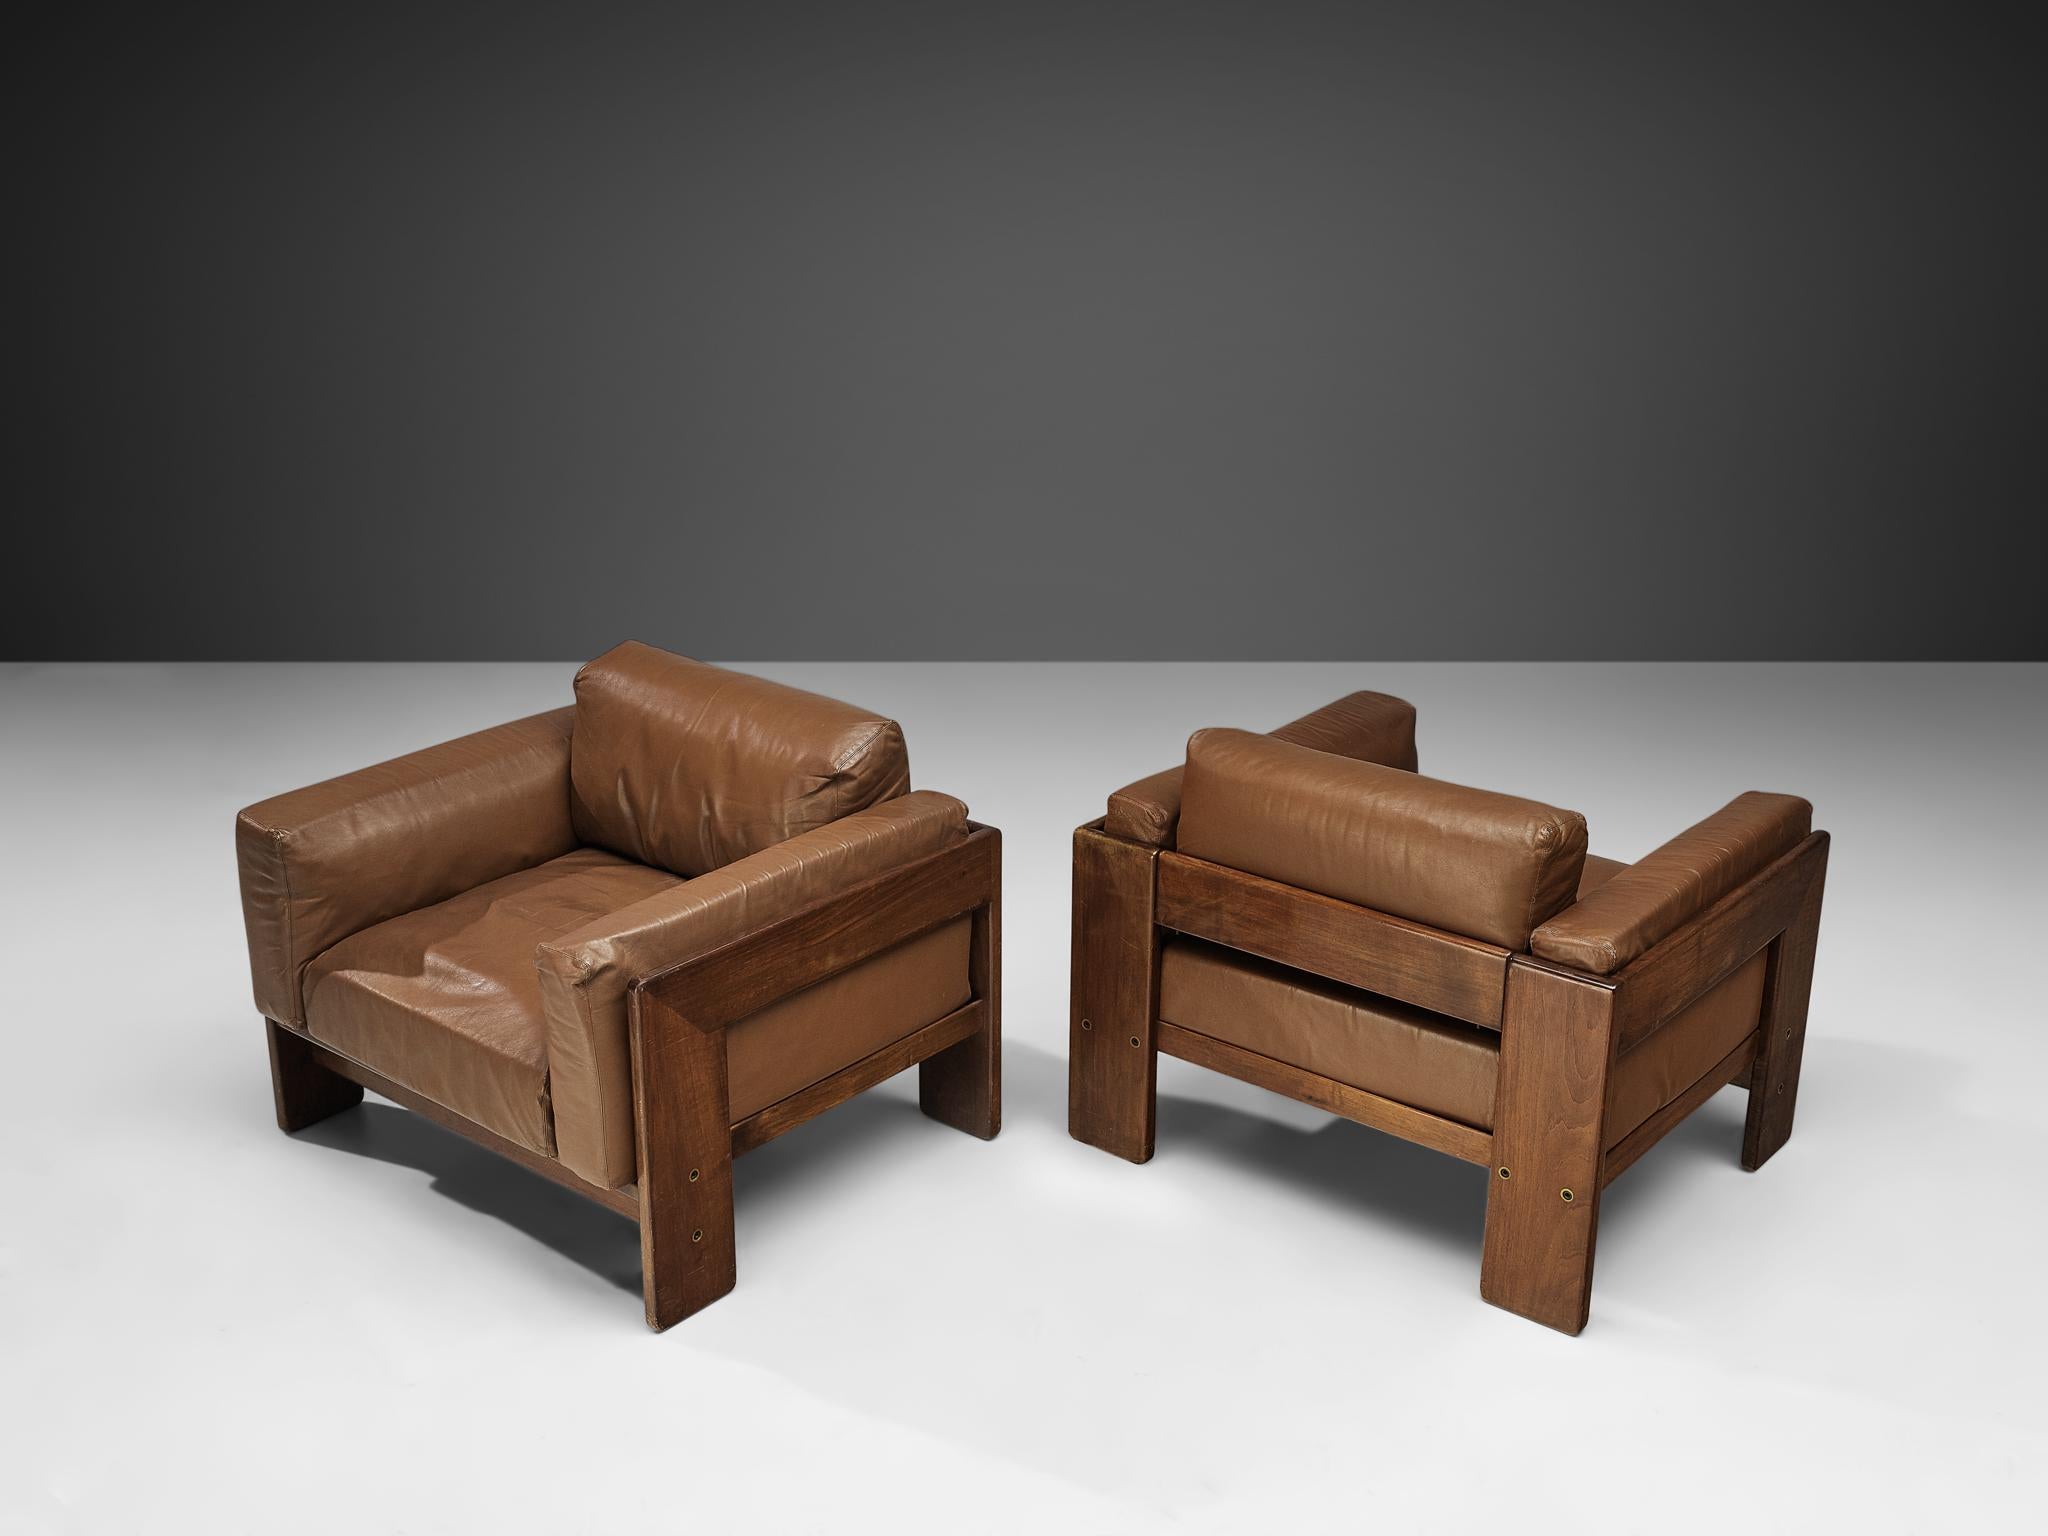 Mid-20th Century Tobia Scarpa Pair of 'Bastiano' Club Chairs in Brown Leather and Walnut